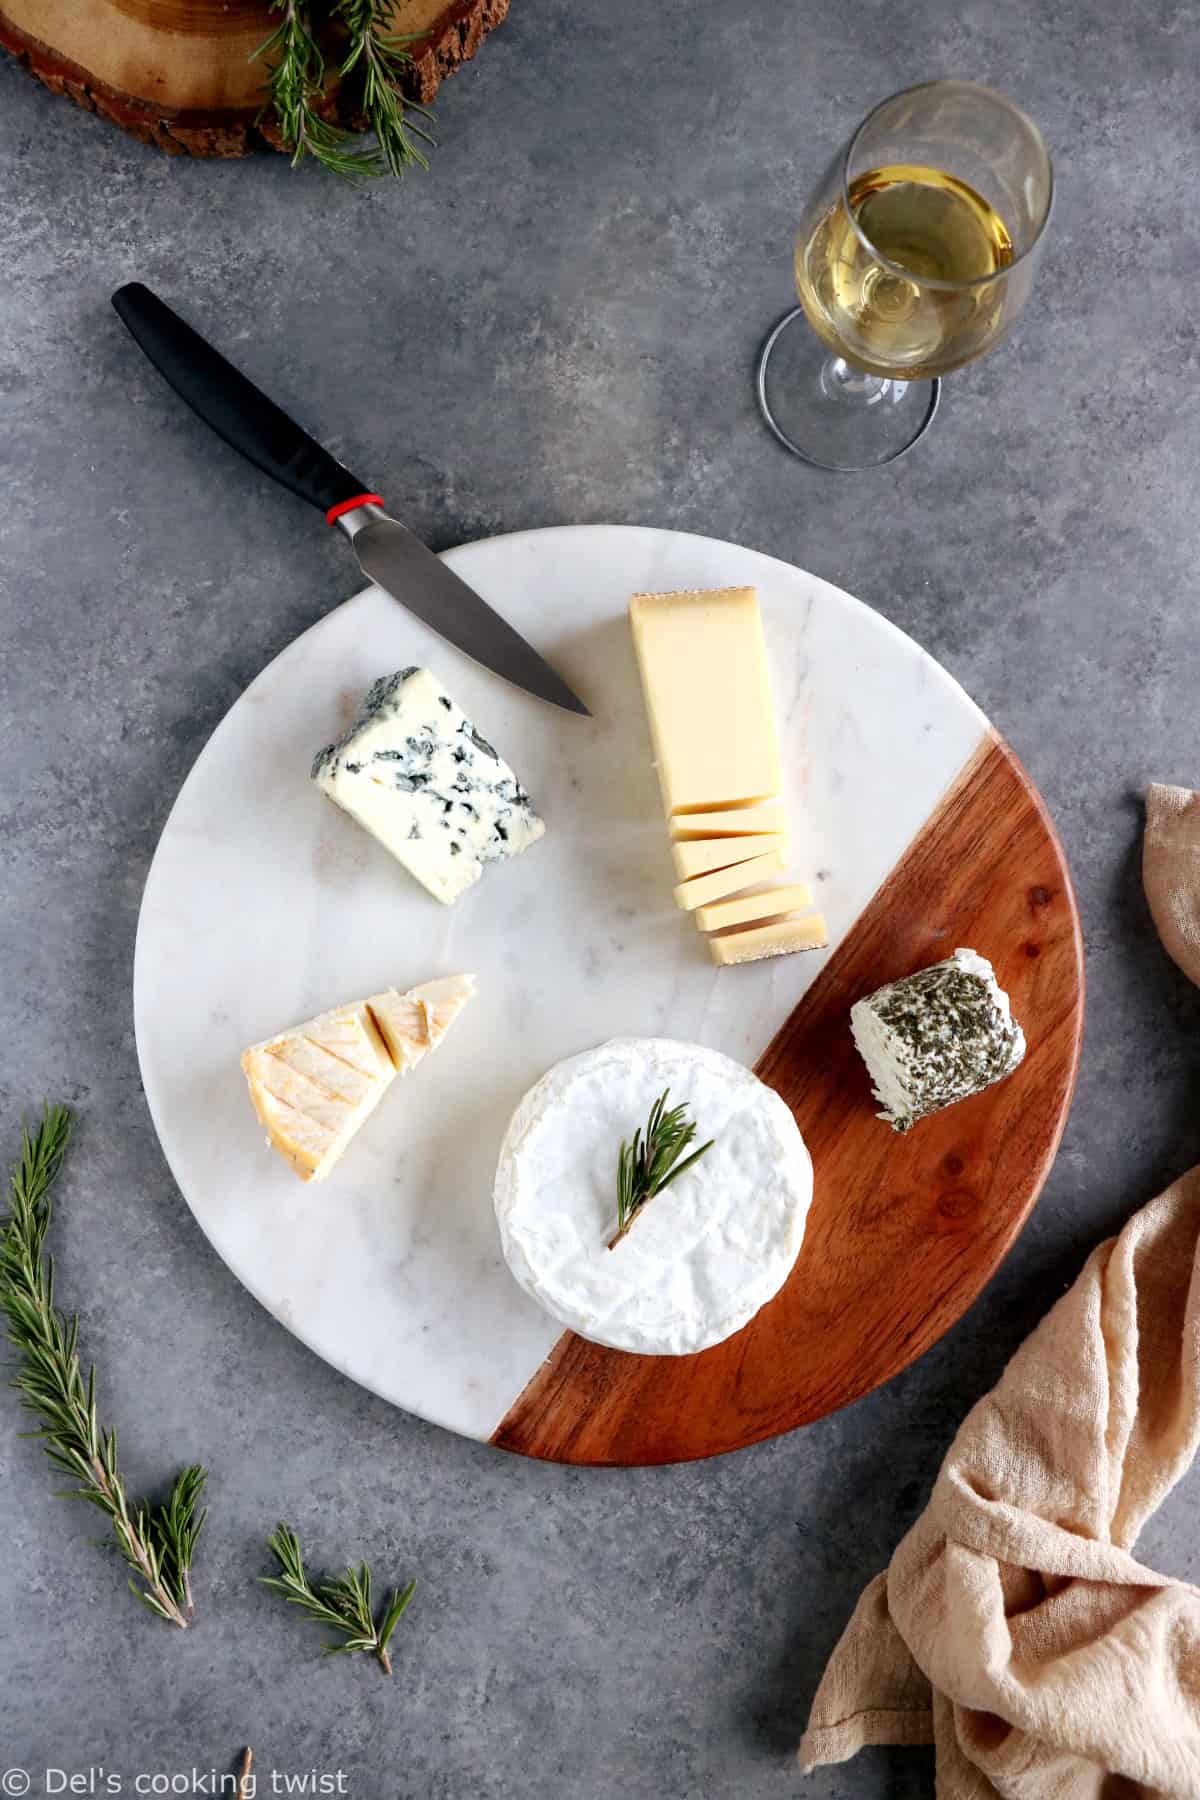 How to Make a Cheese Board - The Cheese Knees